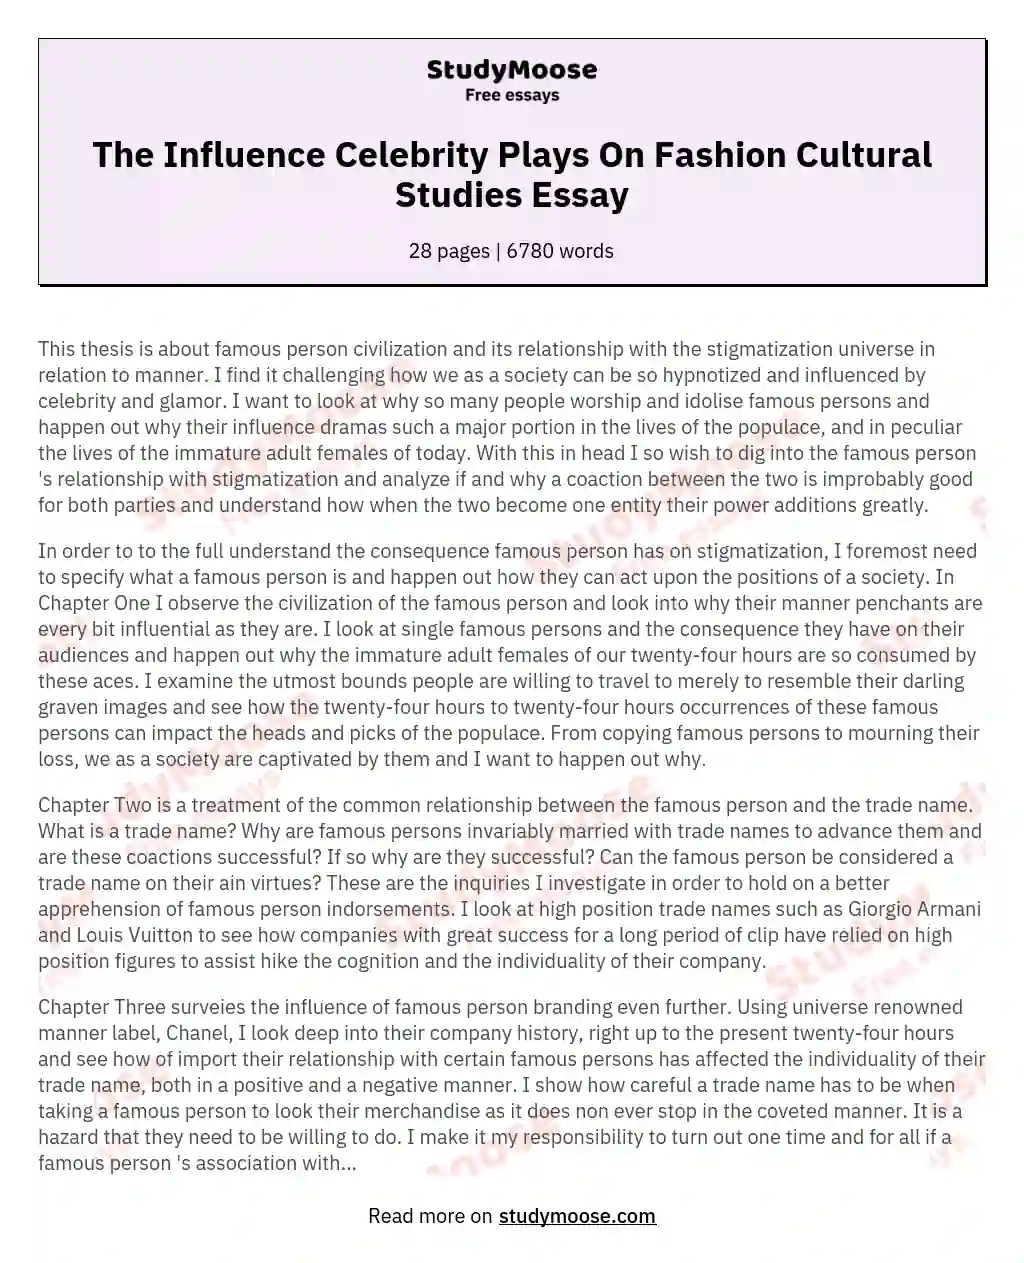 The Influence Celebrity Plays On Fashion Cultural Studies Essay